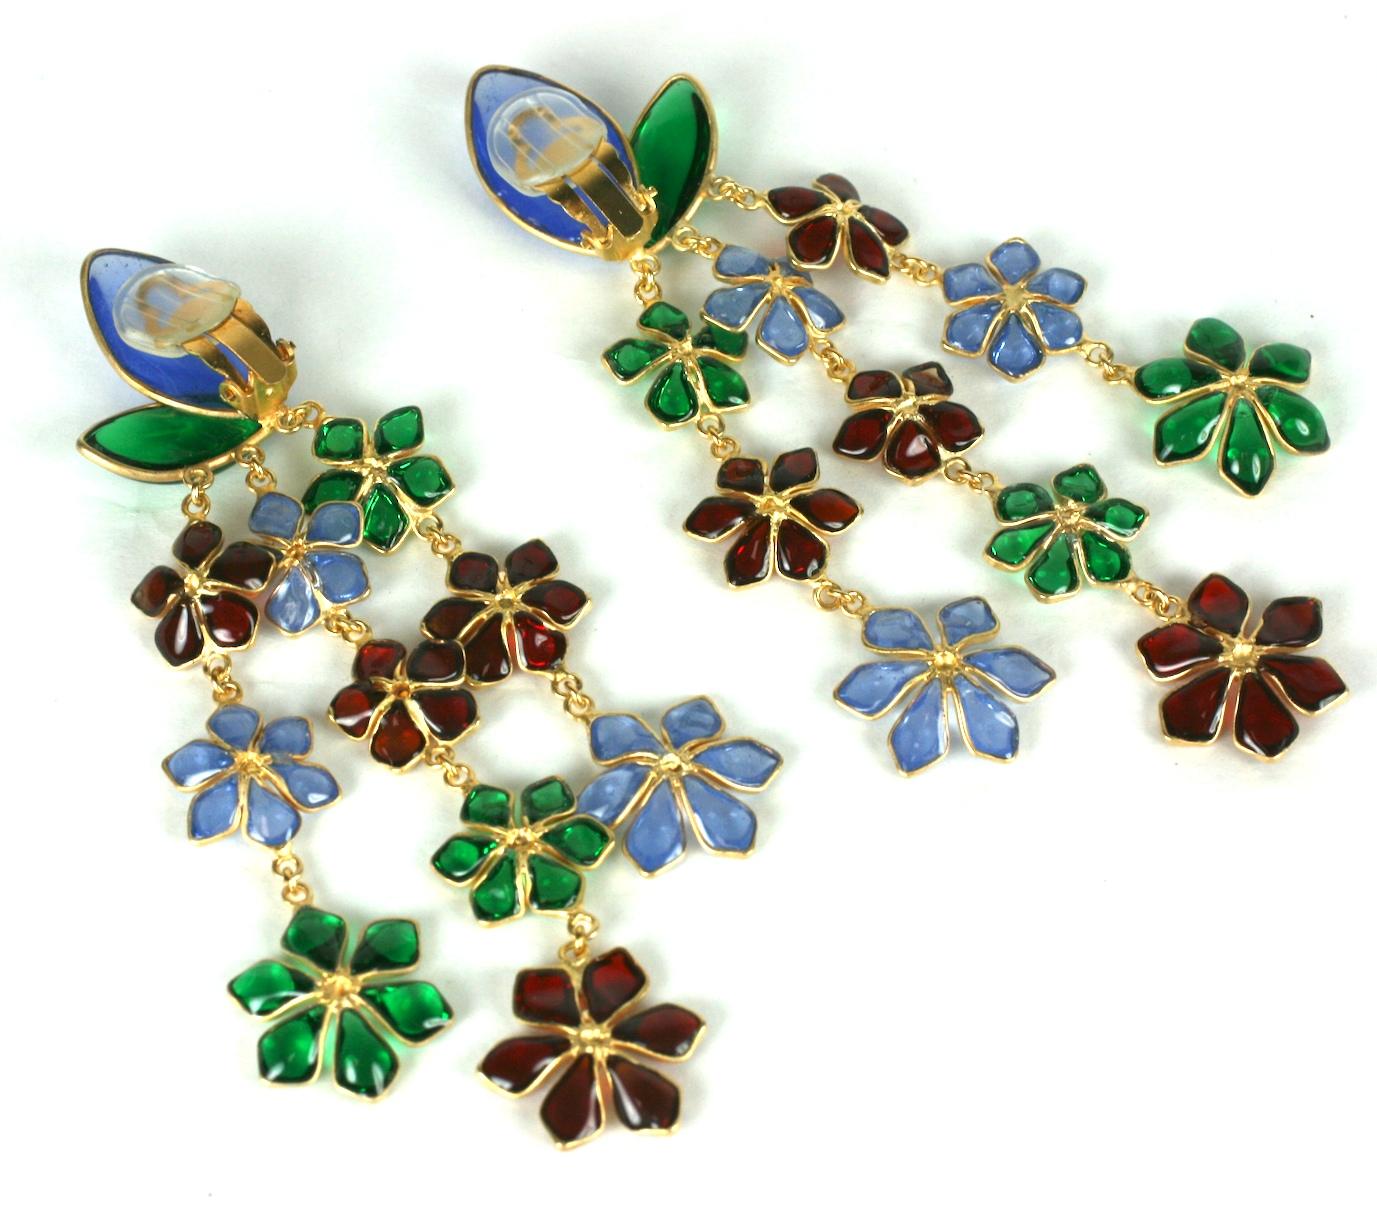 Exceptional Maison Gripoix Anglo Indian inspired long floral cascade ear clips. Of faux emerald, ruby, and pale sapphire poured glass enamel graduated flower heads set in fine glit metal frames. The impressively long earrings has clip back fittings